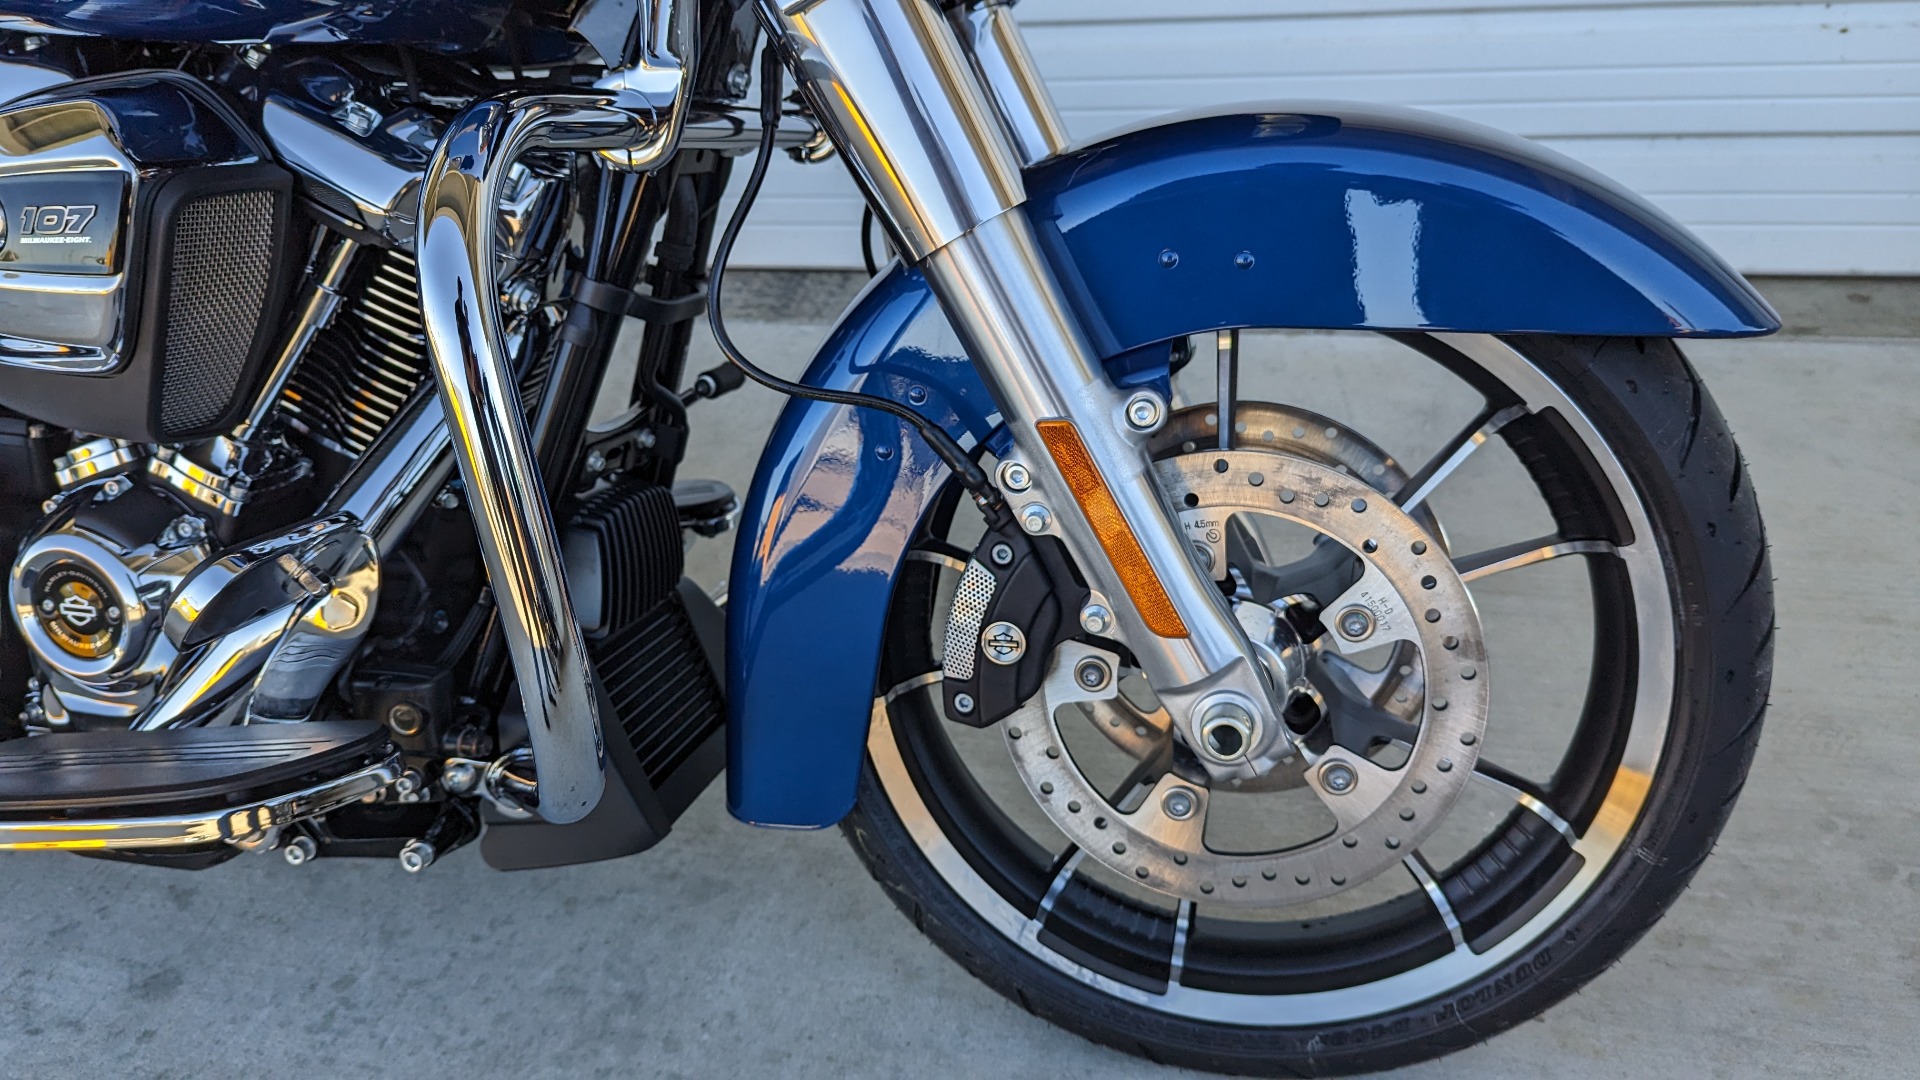 reef blue road glide special for sale near me - Photo 3